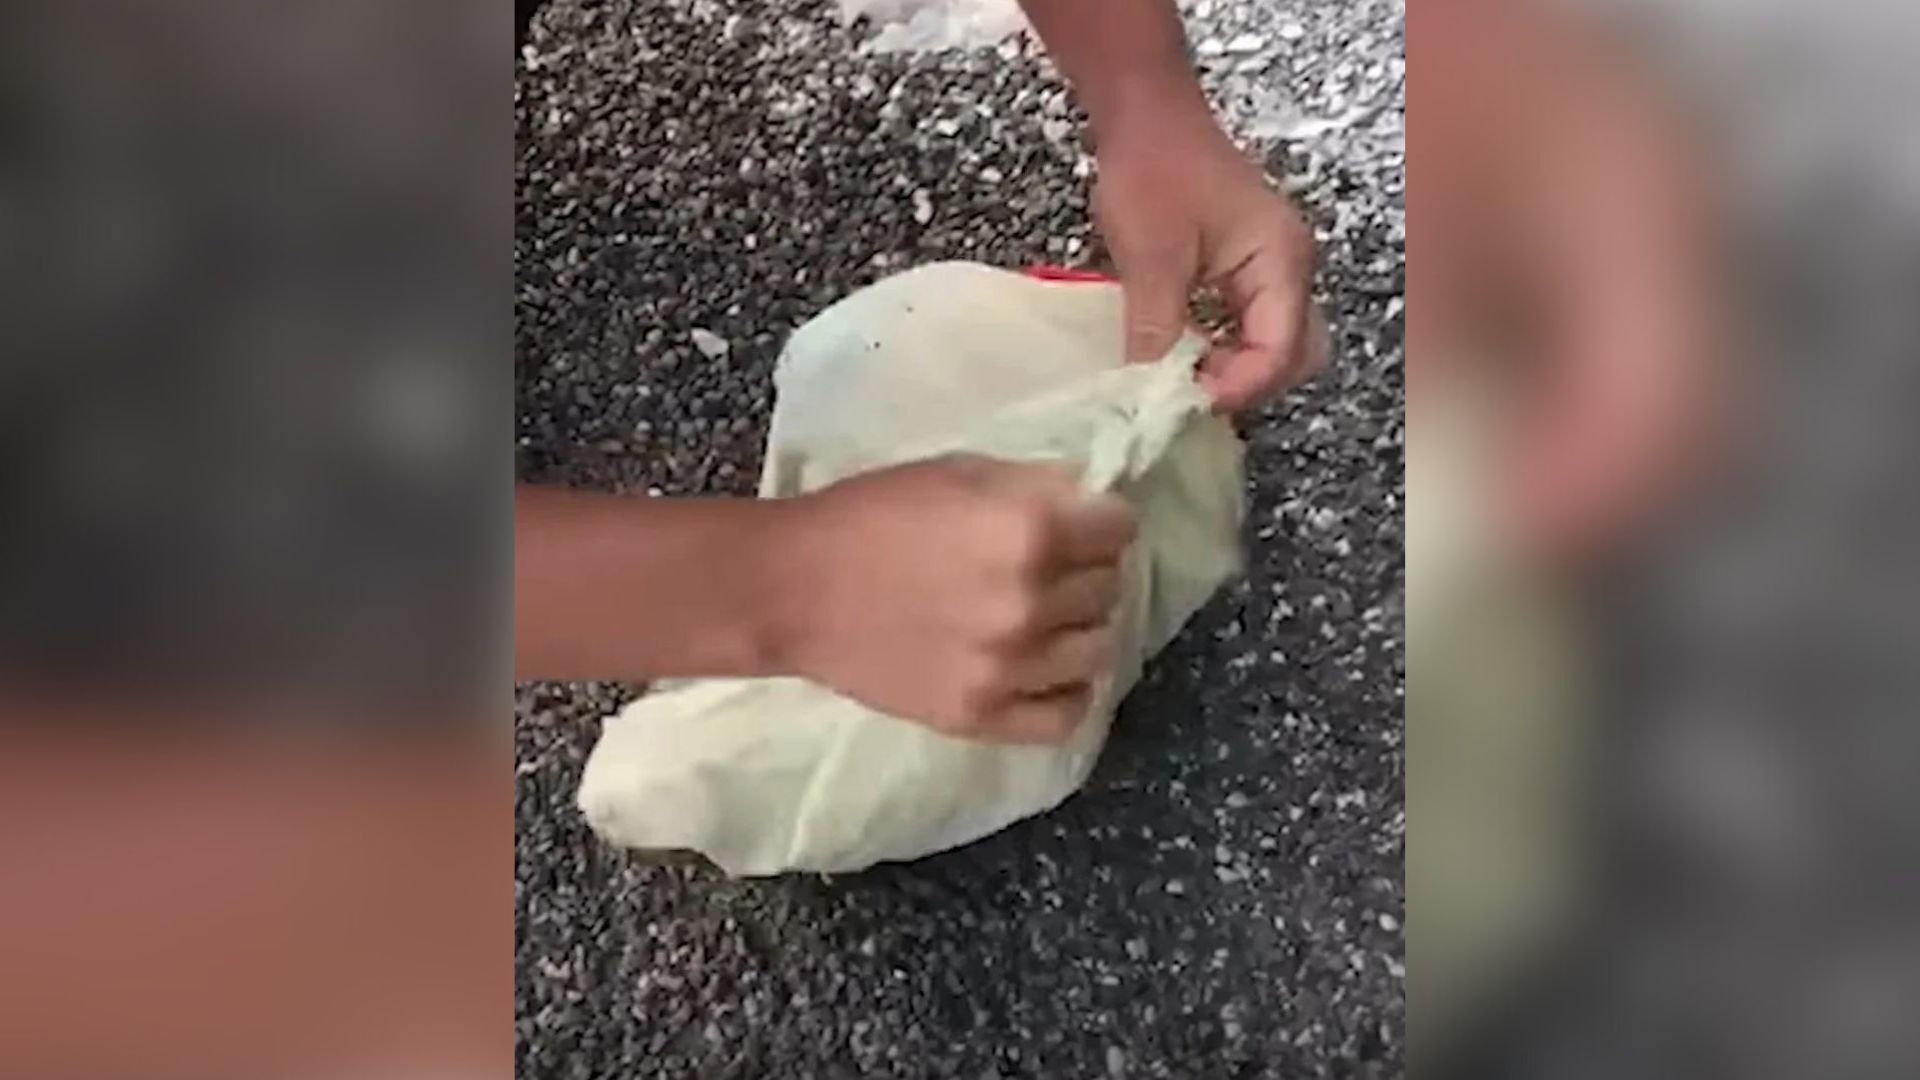 Woman Made A Shocking Discovery When She Found A Small Plastic Bag In The Bushes